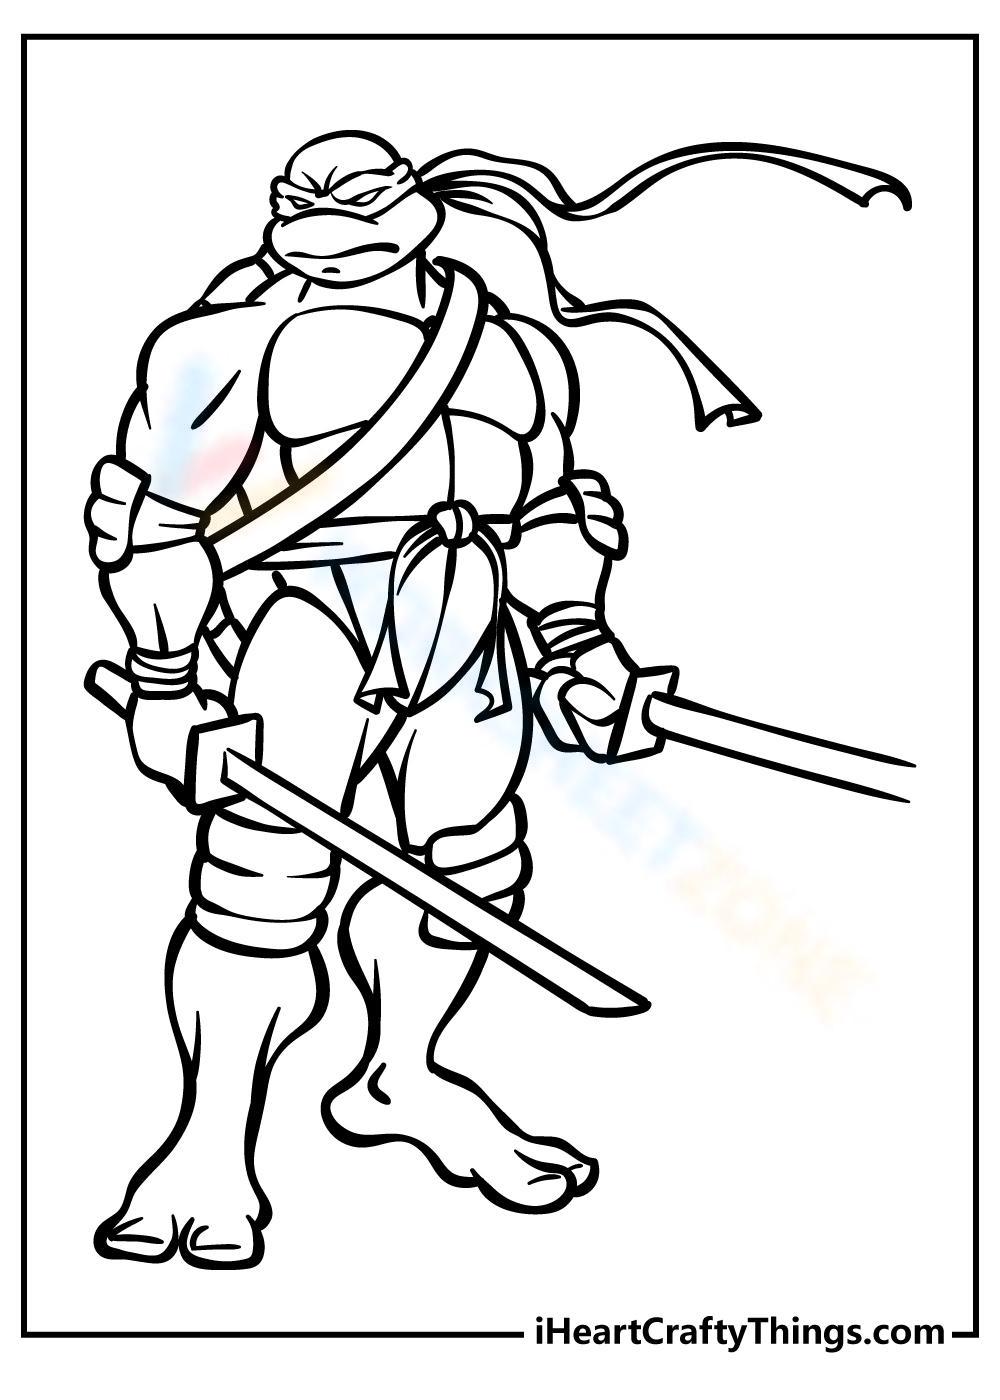 Free printable ninja turtles coloring pages for all ages